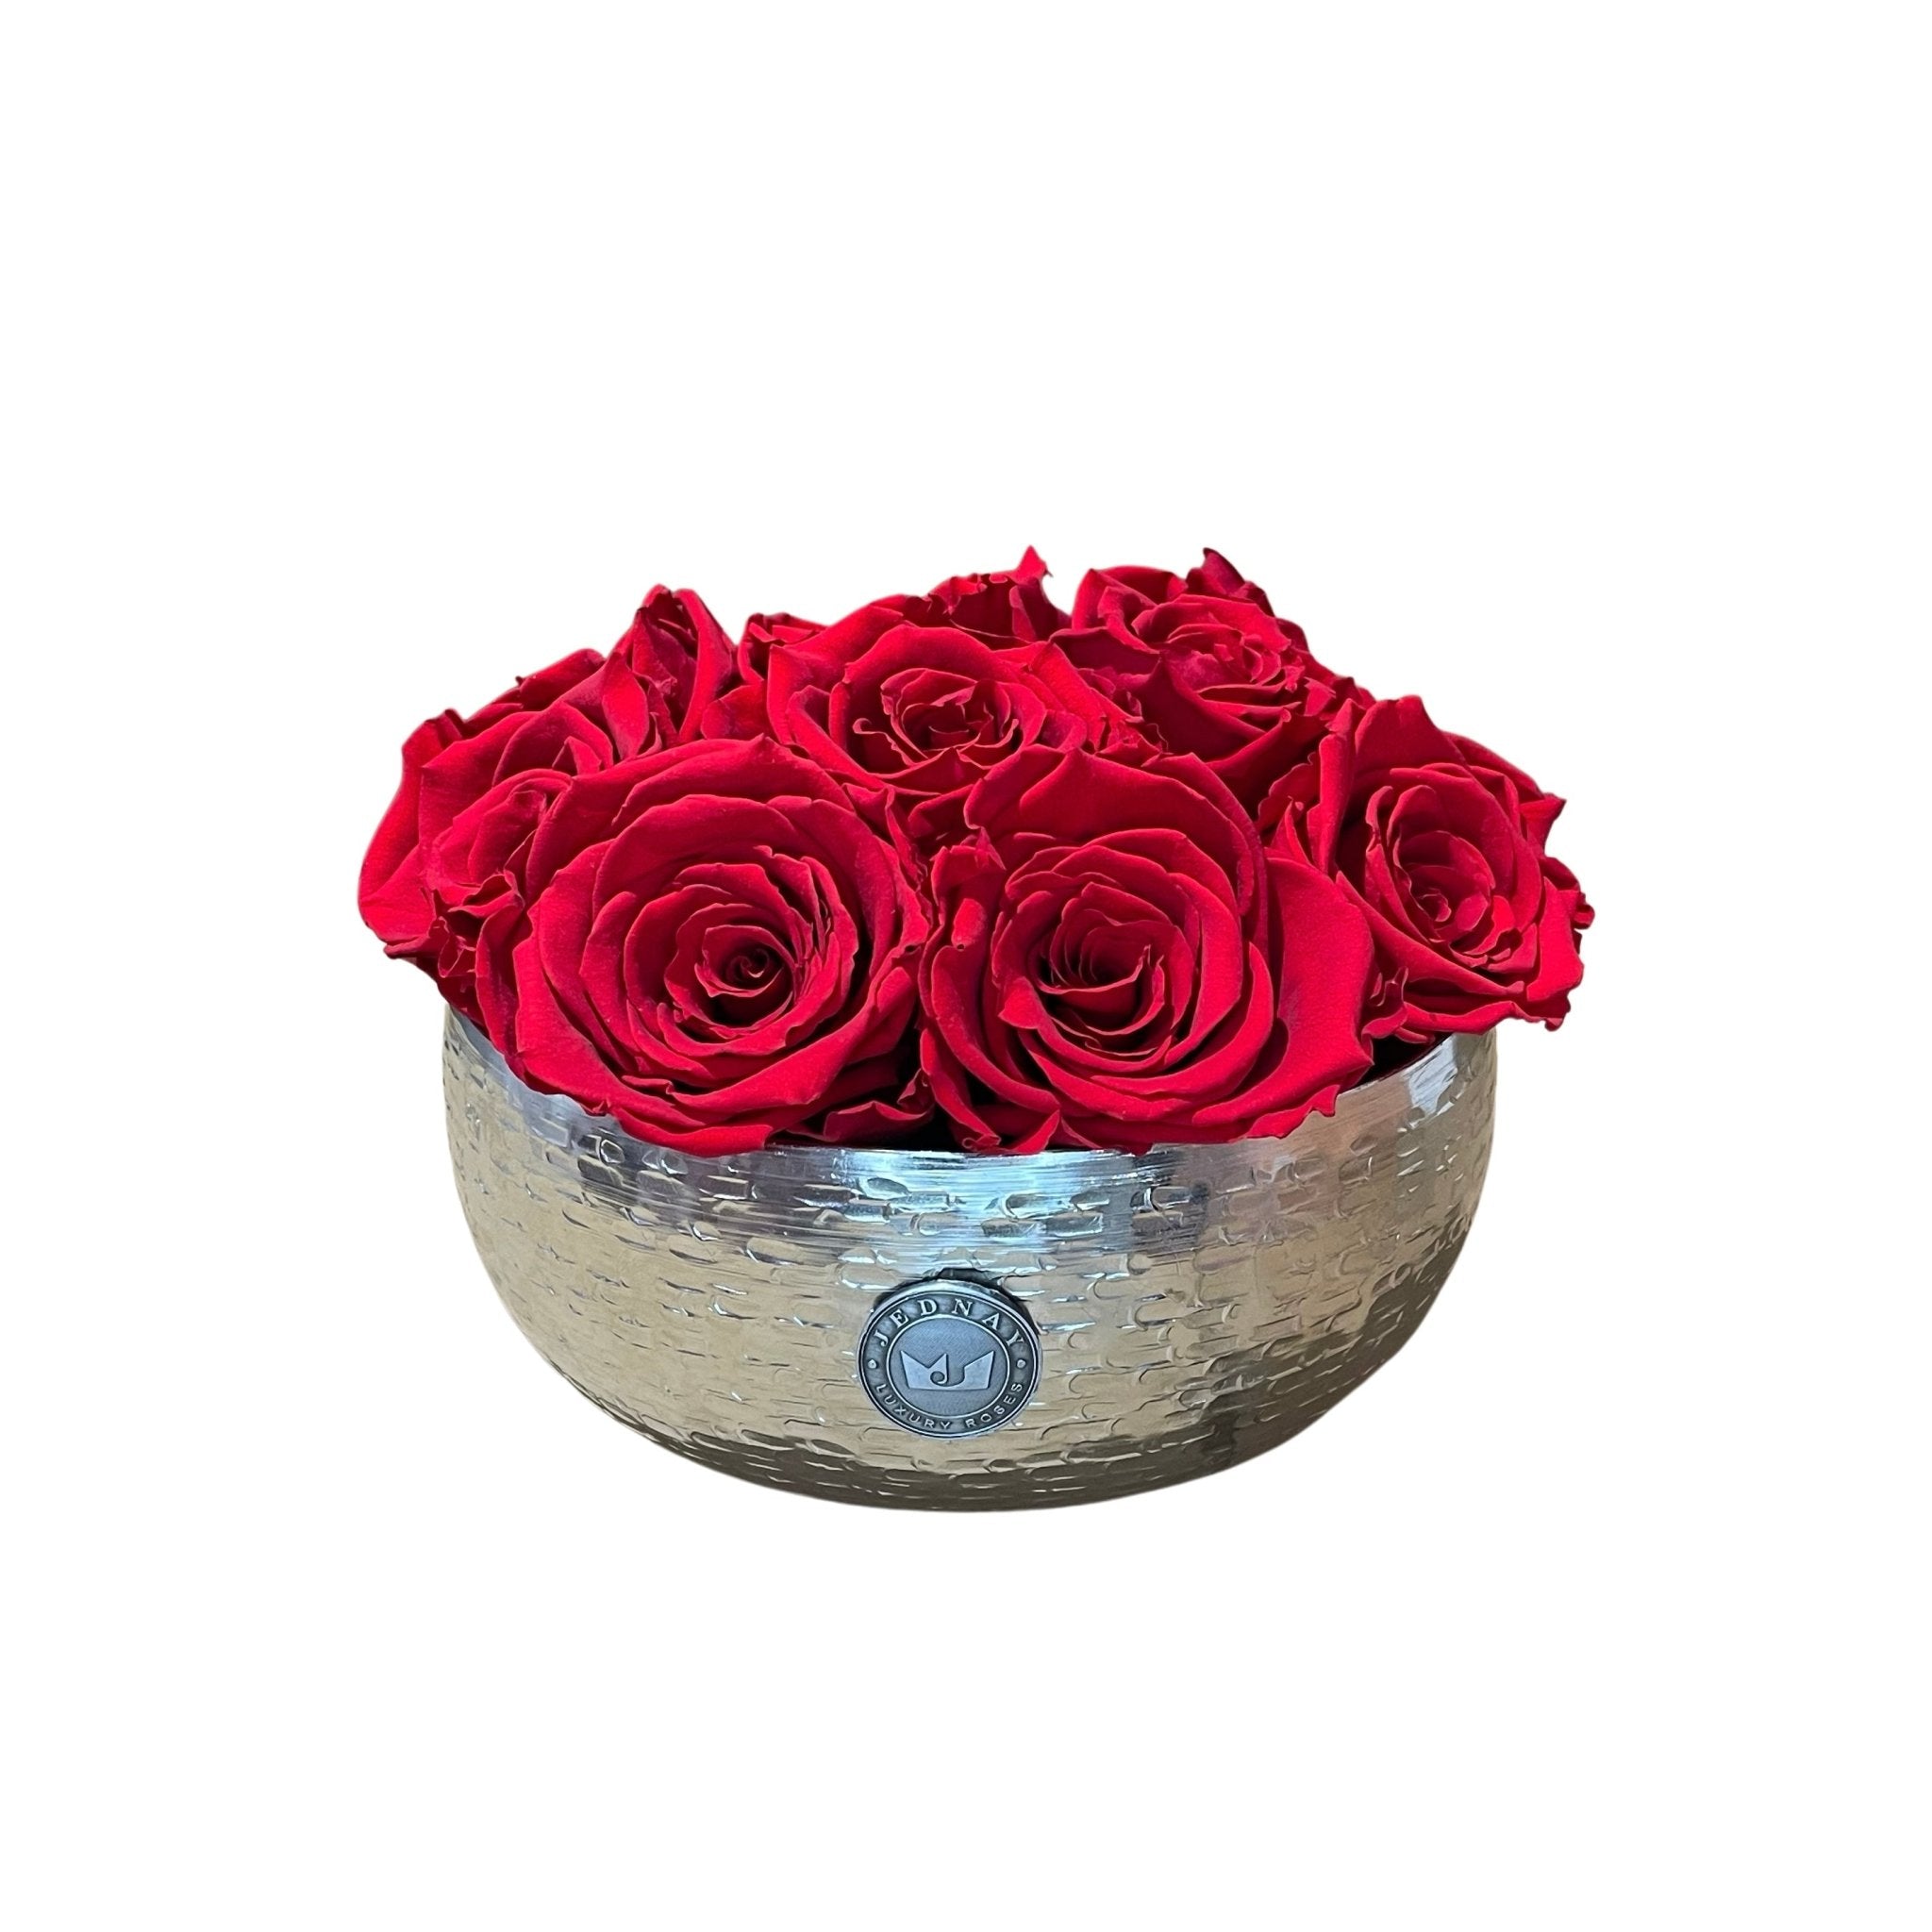 The Knightsbridge - Classic Red Forever Roses - Chrome Bowl - Jednay Roses